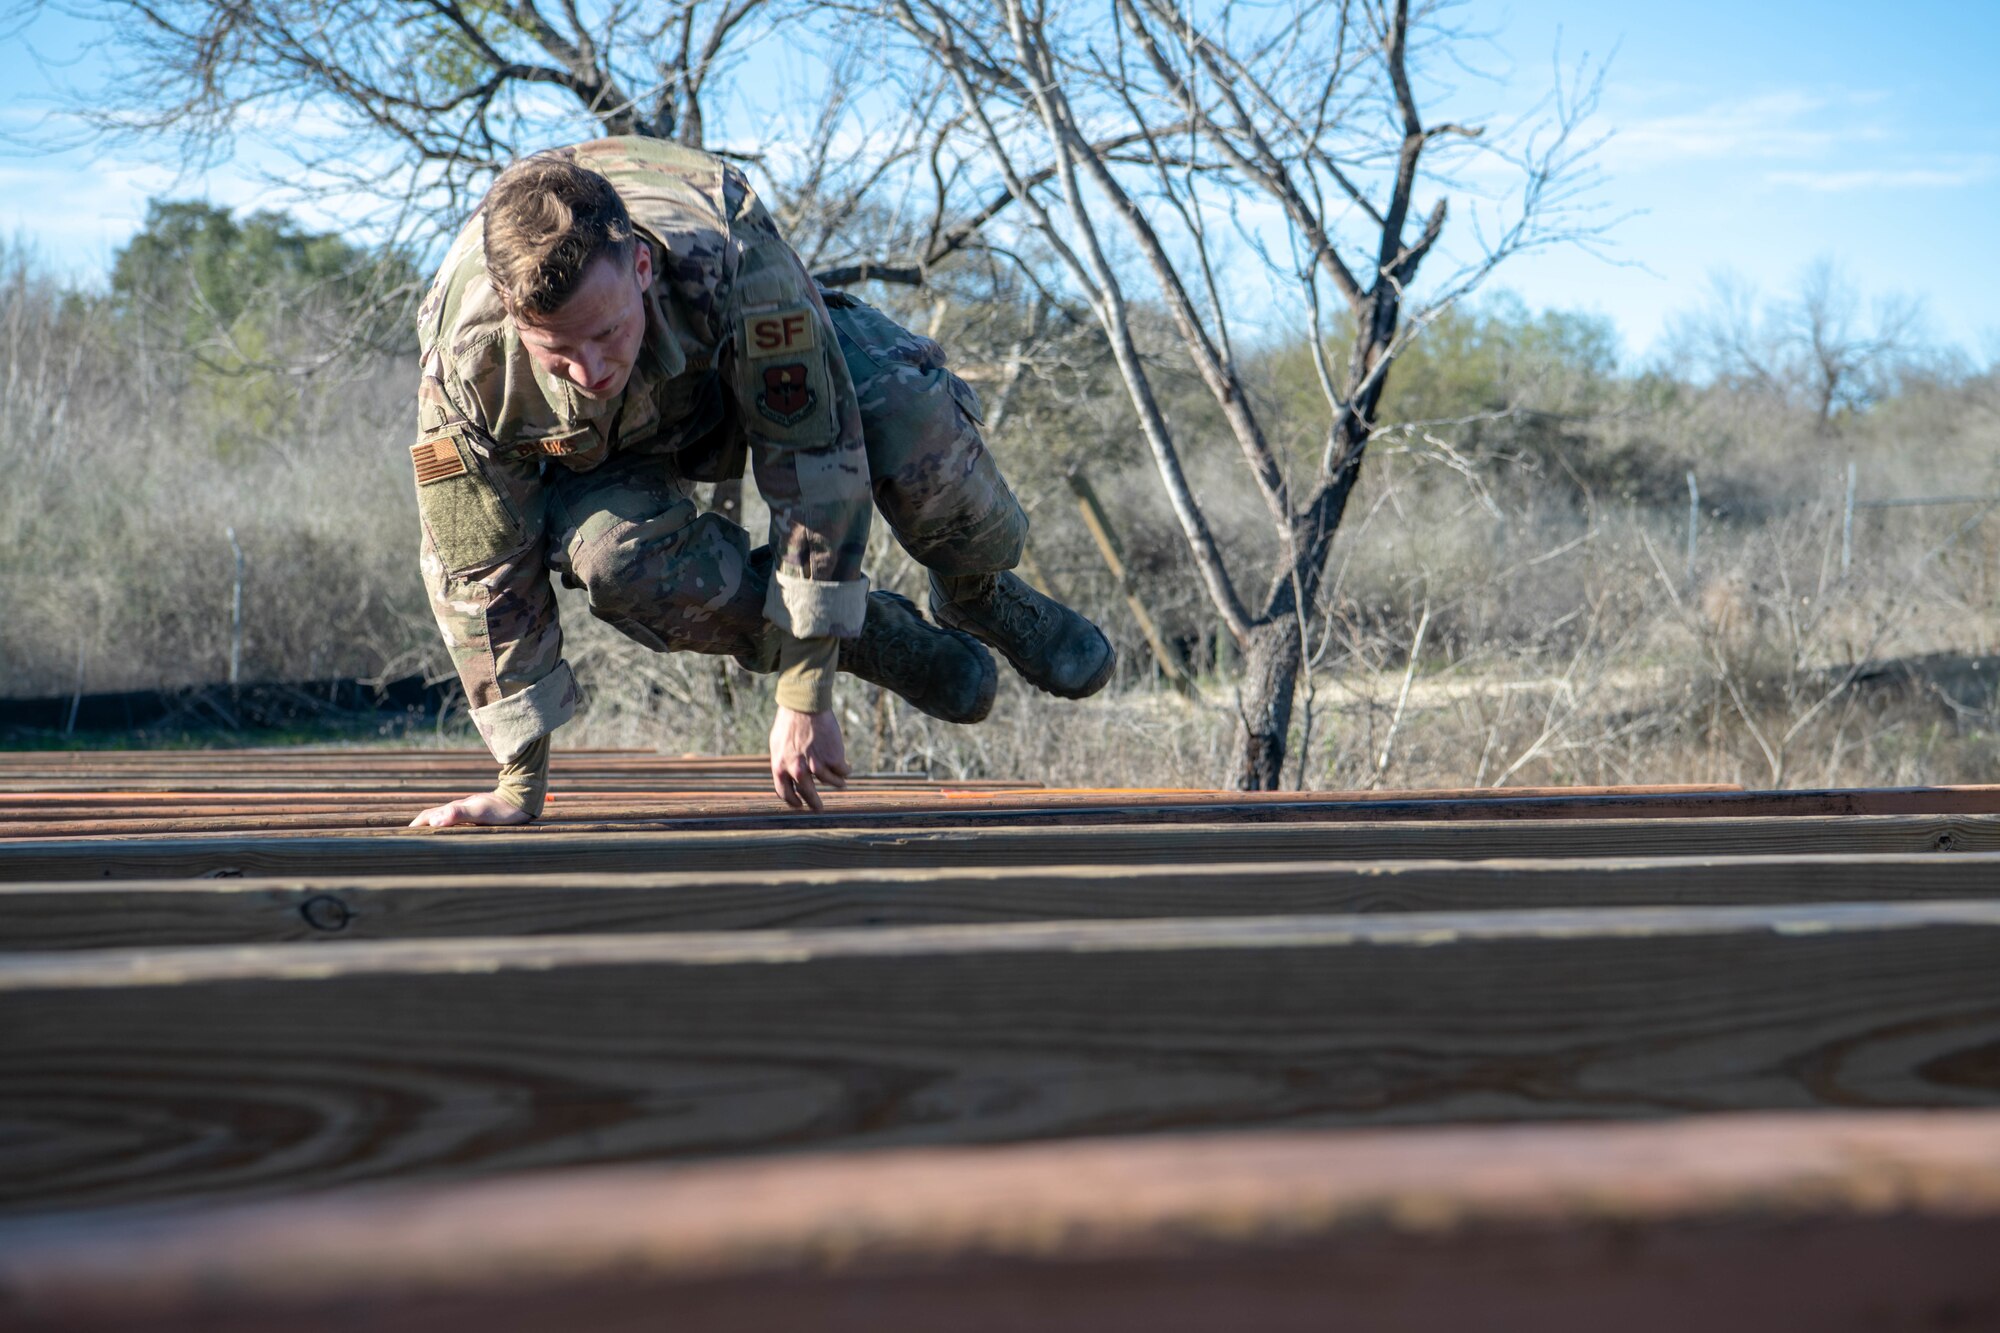 U.S. Air Force Senior Airman Matthew Brooks, 81st Security Forces Squadron military working dog handler, Keesler Air Force Base, Miss., takes part in the obstacle course portion of the Air Education and Training Command Defender Challenge team tryout at Joint Base San Antonio-Medina Annex, Texas, Jan. 29, 2020. The five-day selection camp includes a physical fitness test, M-9 and M-4 weapons firing, the alpha warrior obstacle course, a ruck march and also includes a military working dog tryout as well. A total of 27 Airmen, including five MWD handlers and their canine partners, were invited to tryout for the team. The seven selectees to the AETC team will represent the First Command at the career field’s world-wide competition that will be held at JBSA-Camp Bullis in May 2020. (U.S. Air Force photo by Christopher Campbell)